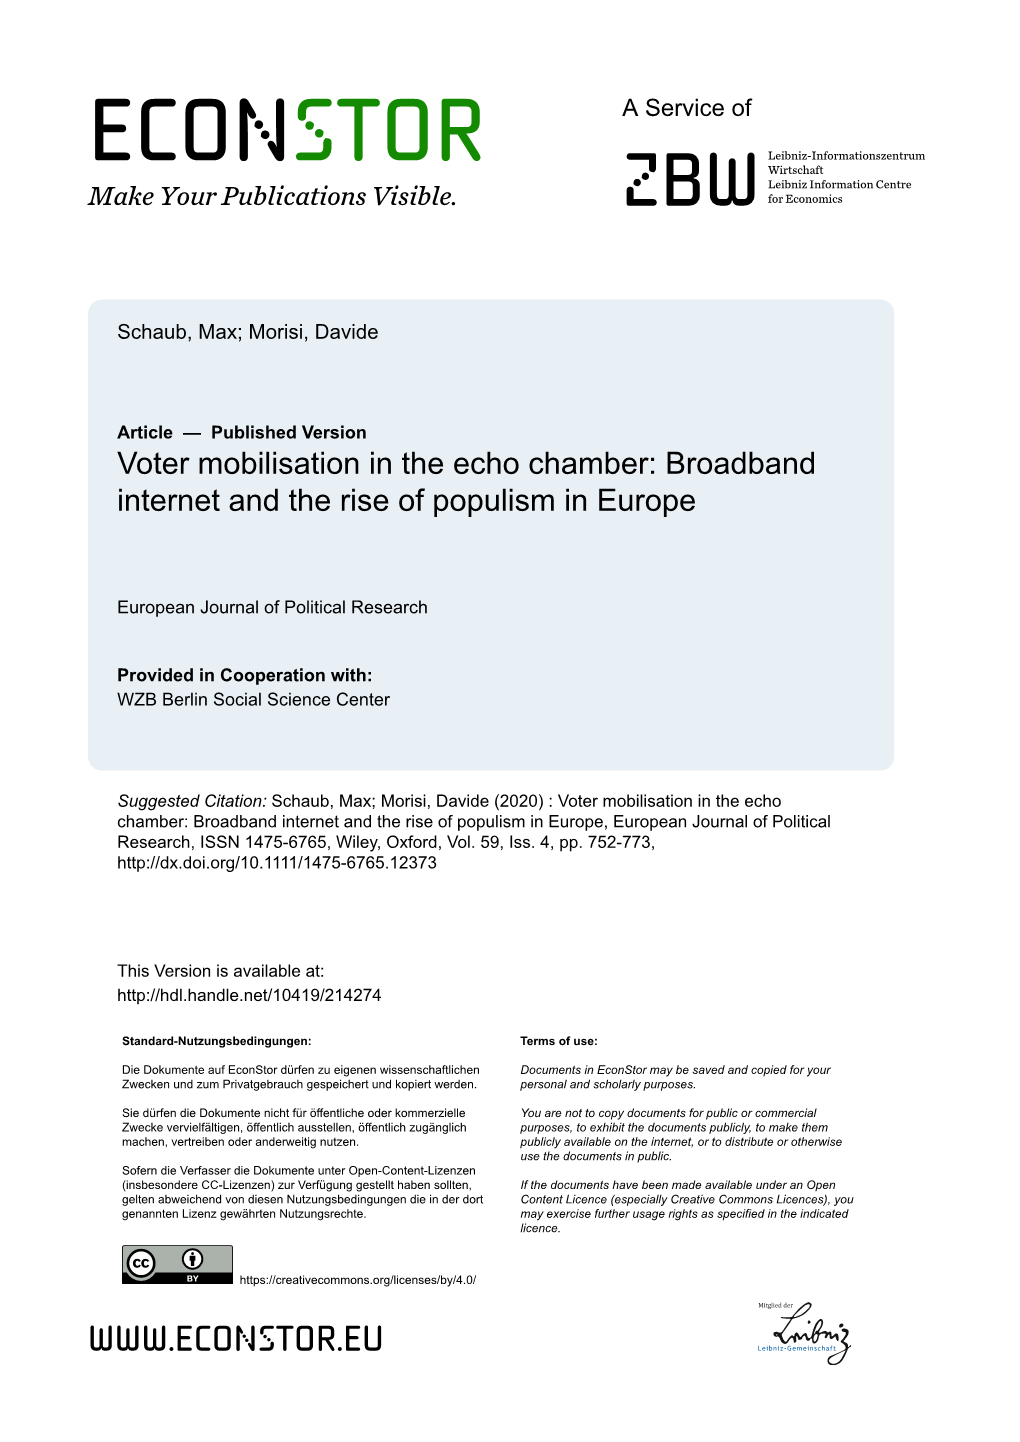 Voter Mobilisation in the Echo Chamber: Broadband Internet and the Rise of Populism in Europe